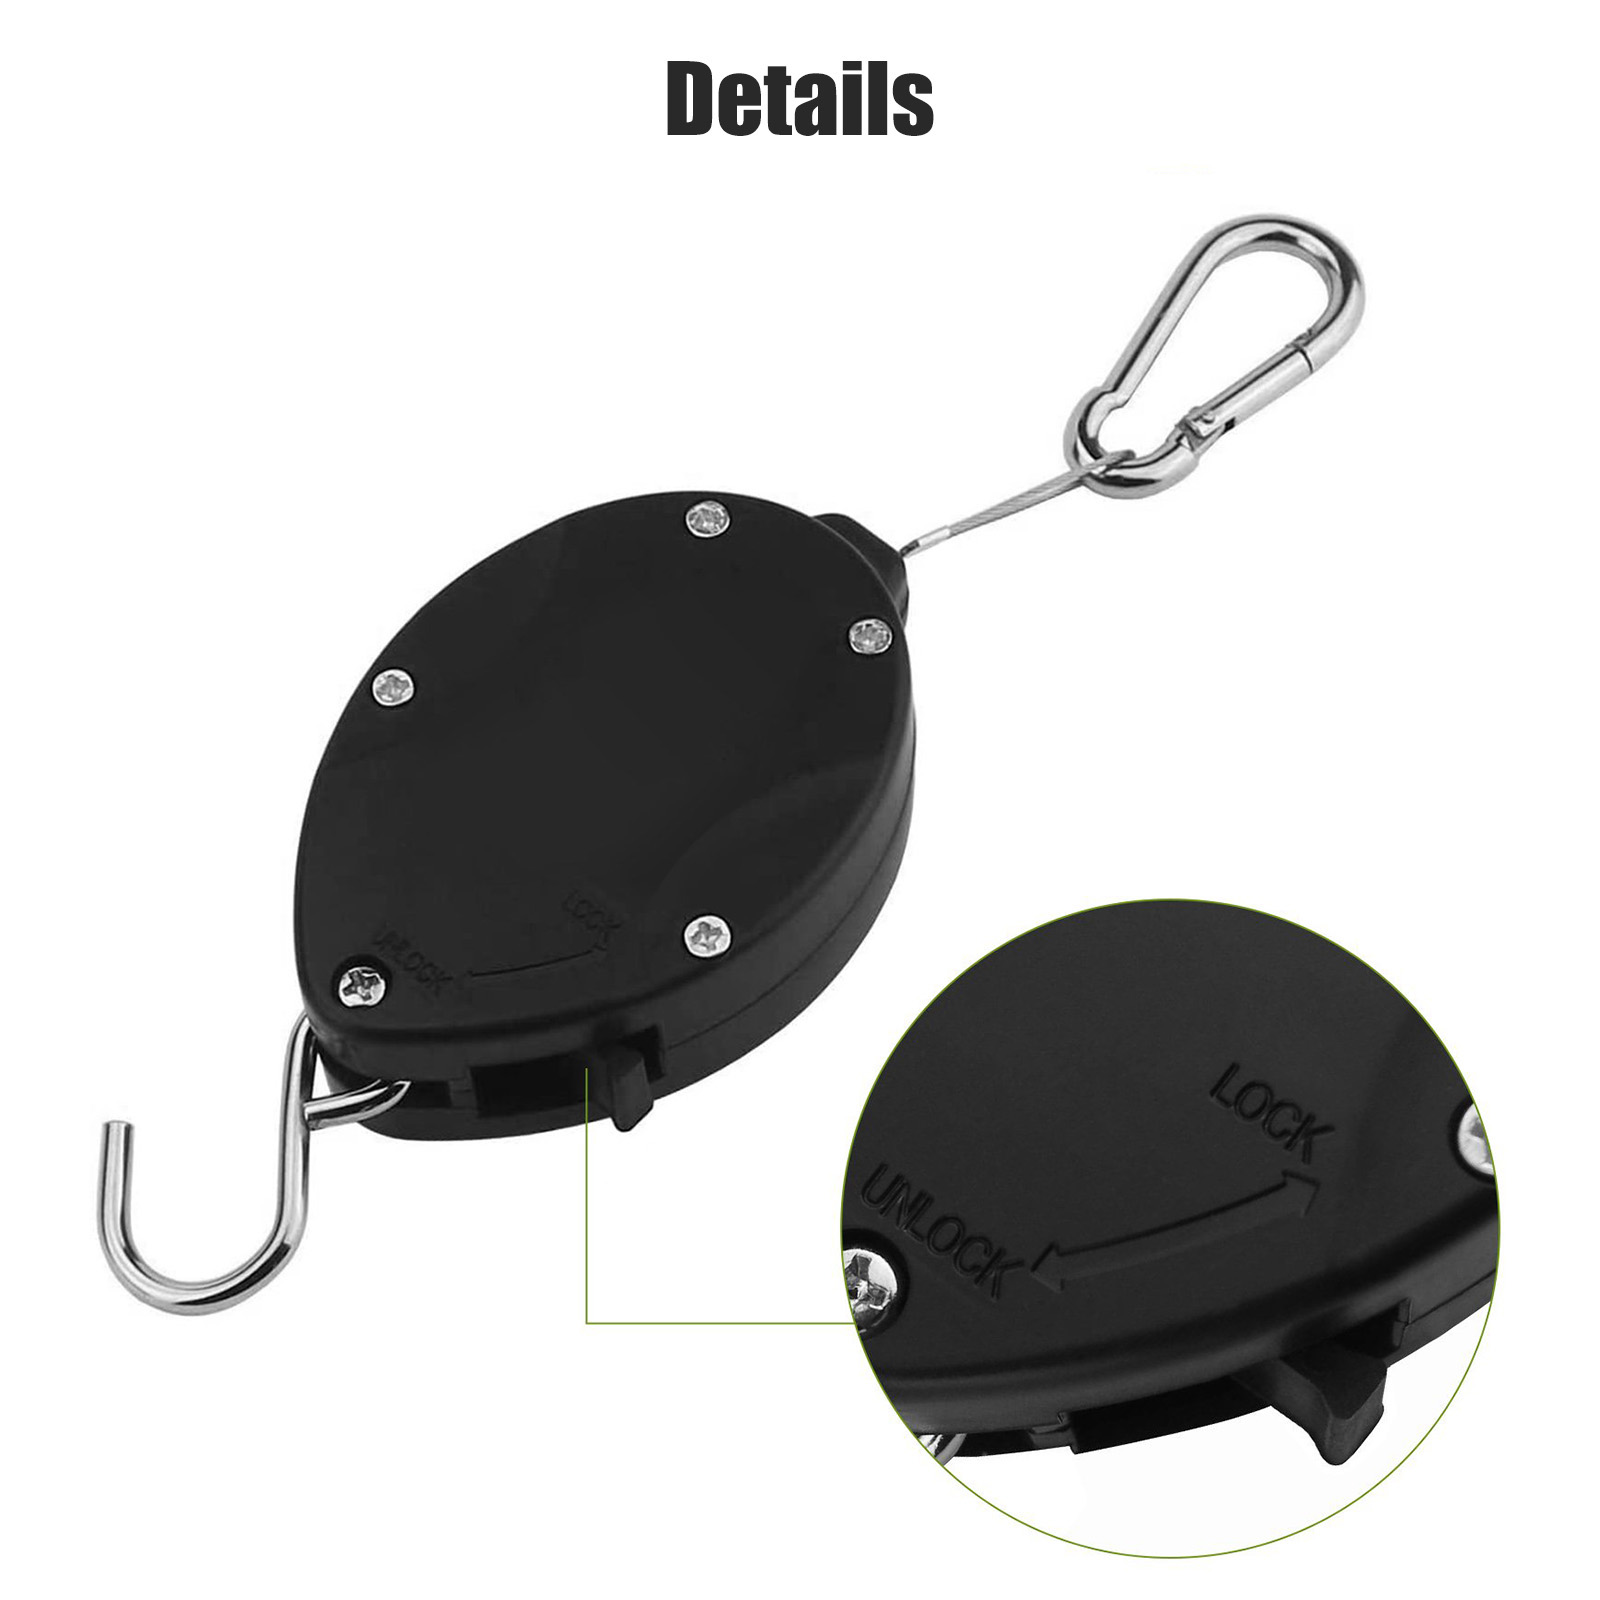 2pcs Retractable Plant Pulley with Locking, TSV Adjustable Plant Hanger Hook, Easy Watering for Hanging Plants, Garden Flower Baskets, Pots and Bird Feeders, Plastic, Black - image 3 of 9